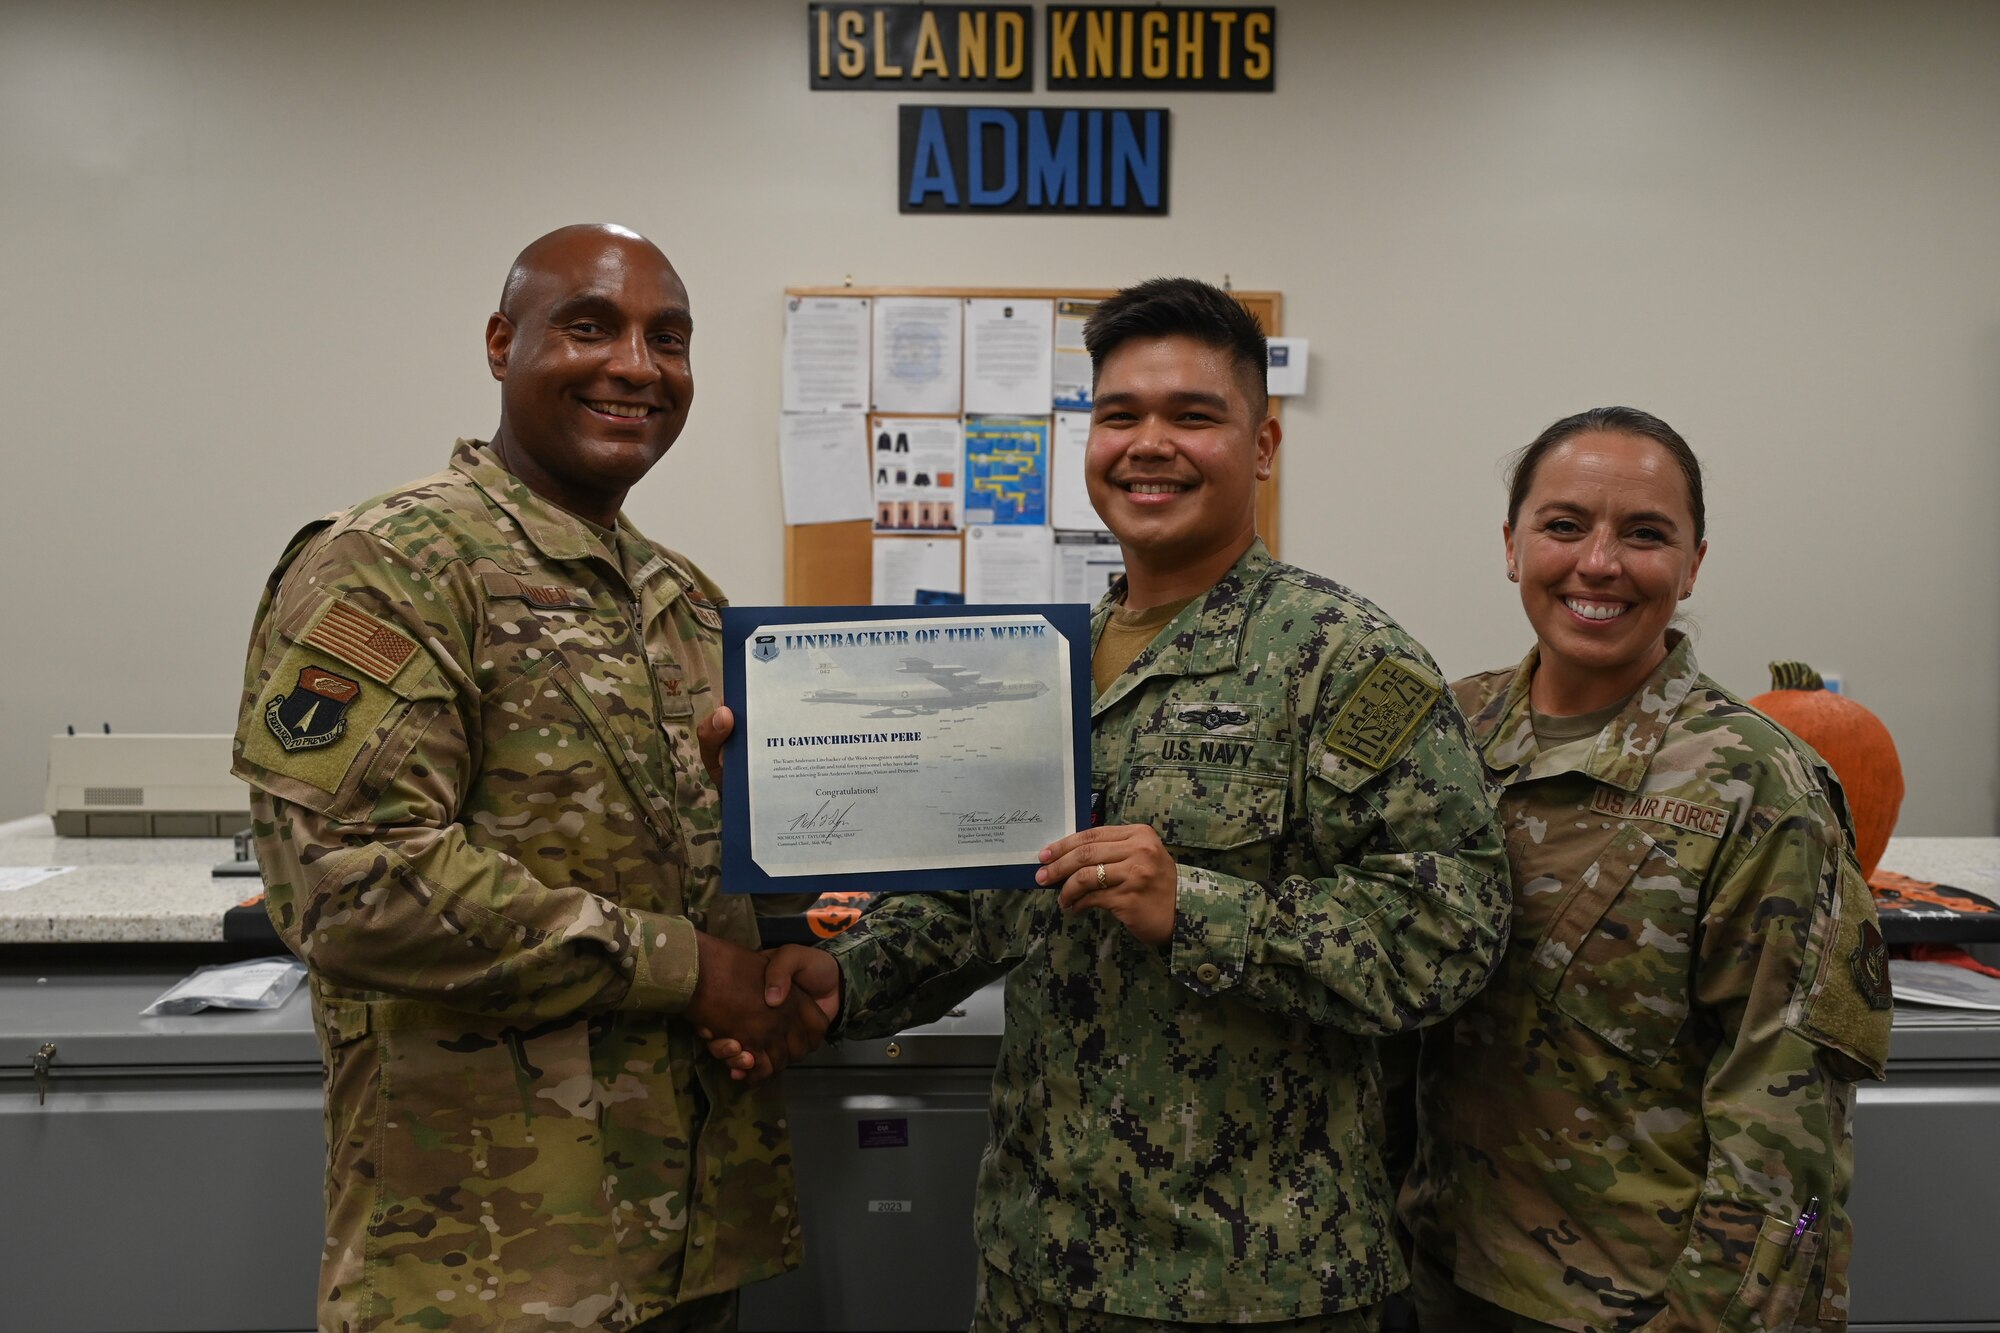 Two Airmen and a Sailor pose for a photo while the sailor holds a certificate.